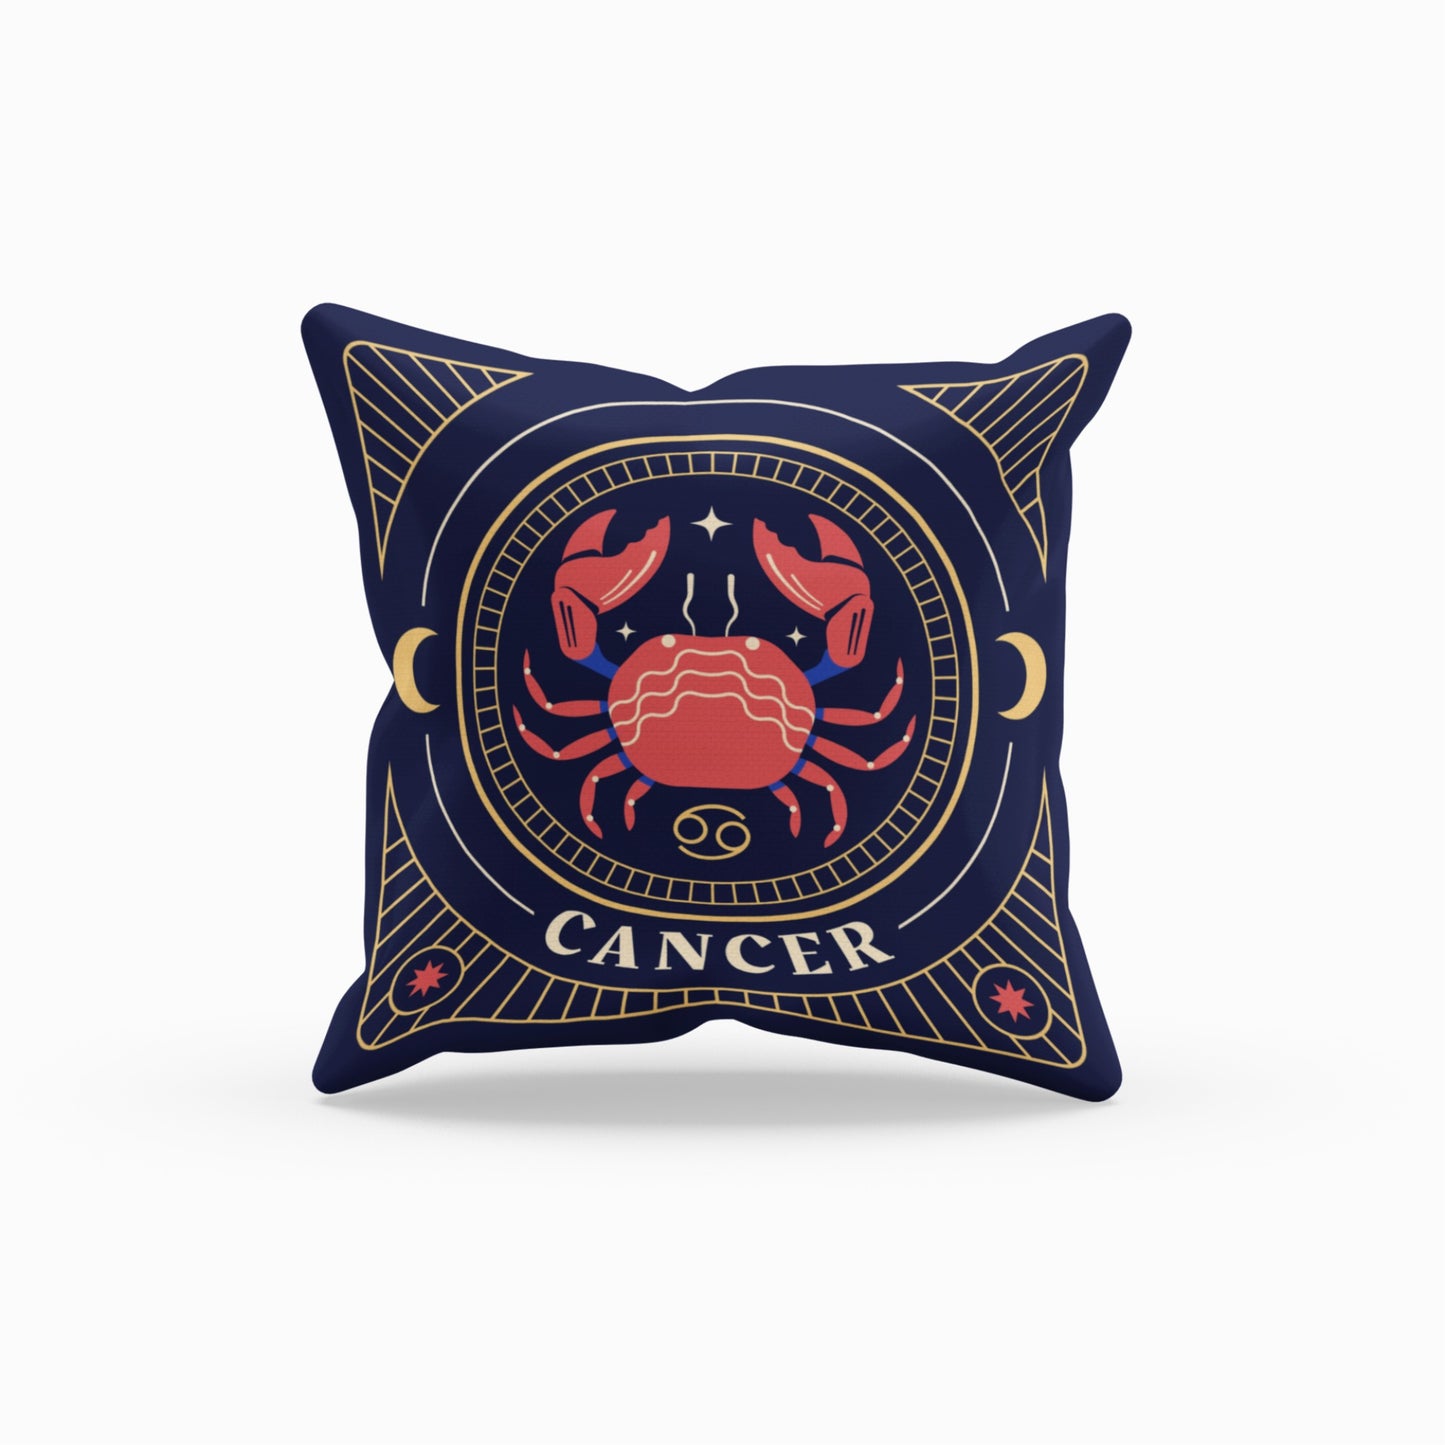 Homeezone's Cancer Astrology Theme Pillow